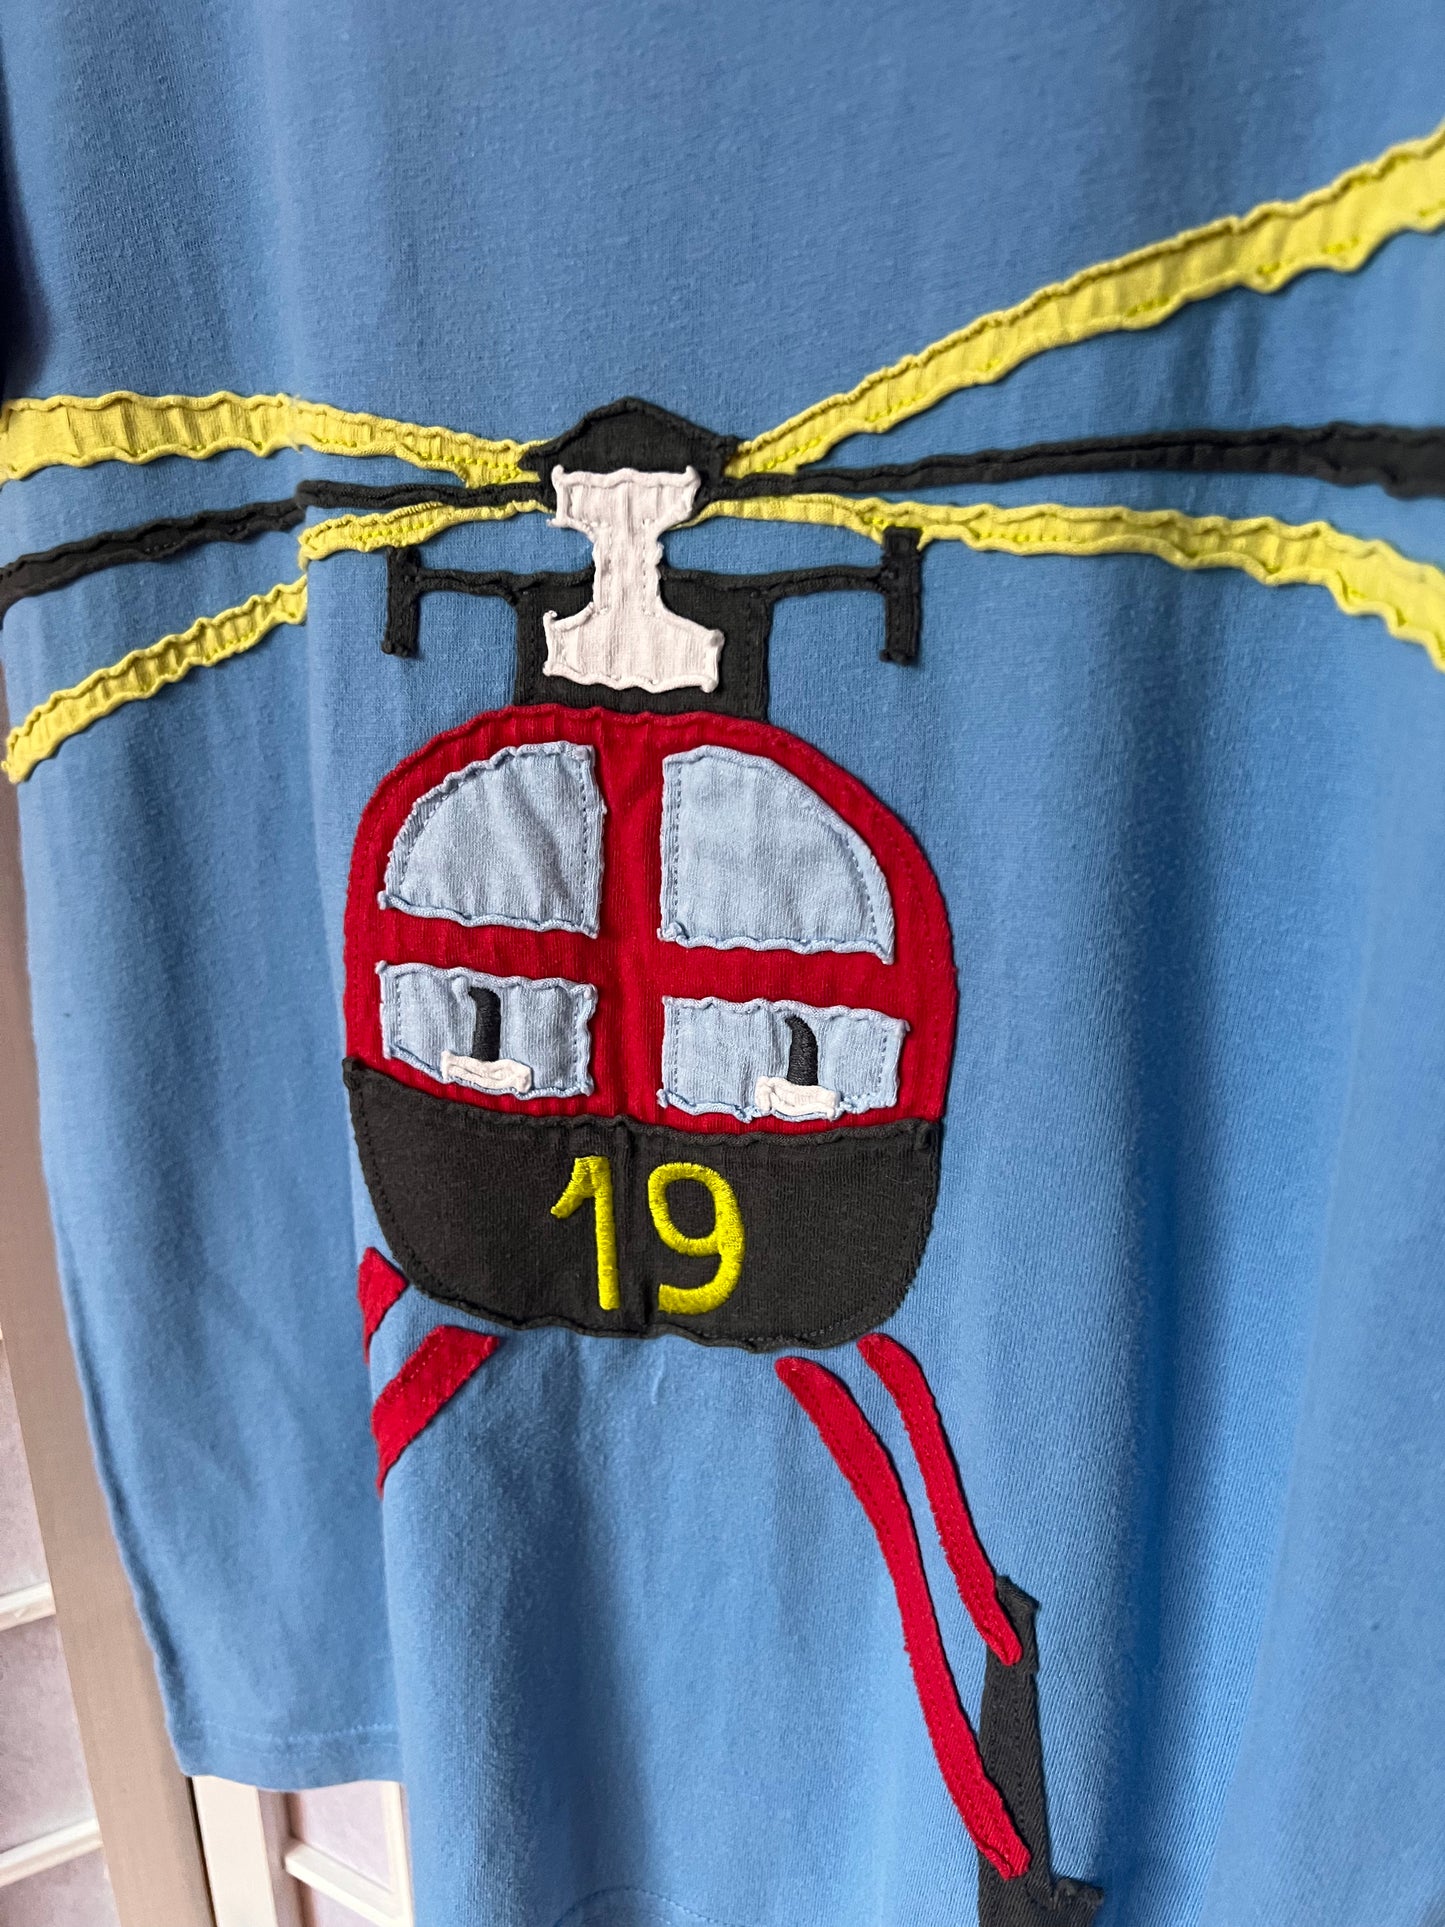 Boden boys helicopter T-shirt Age 9-10years